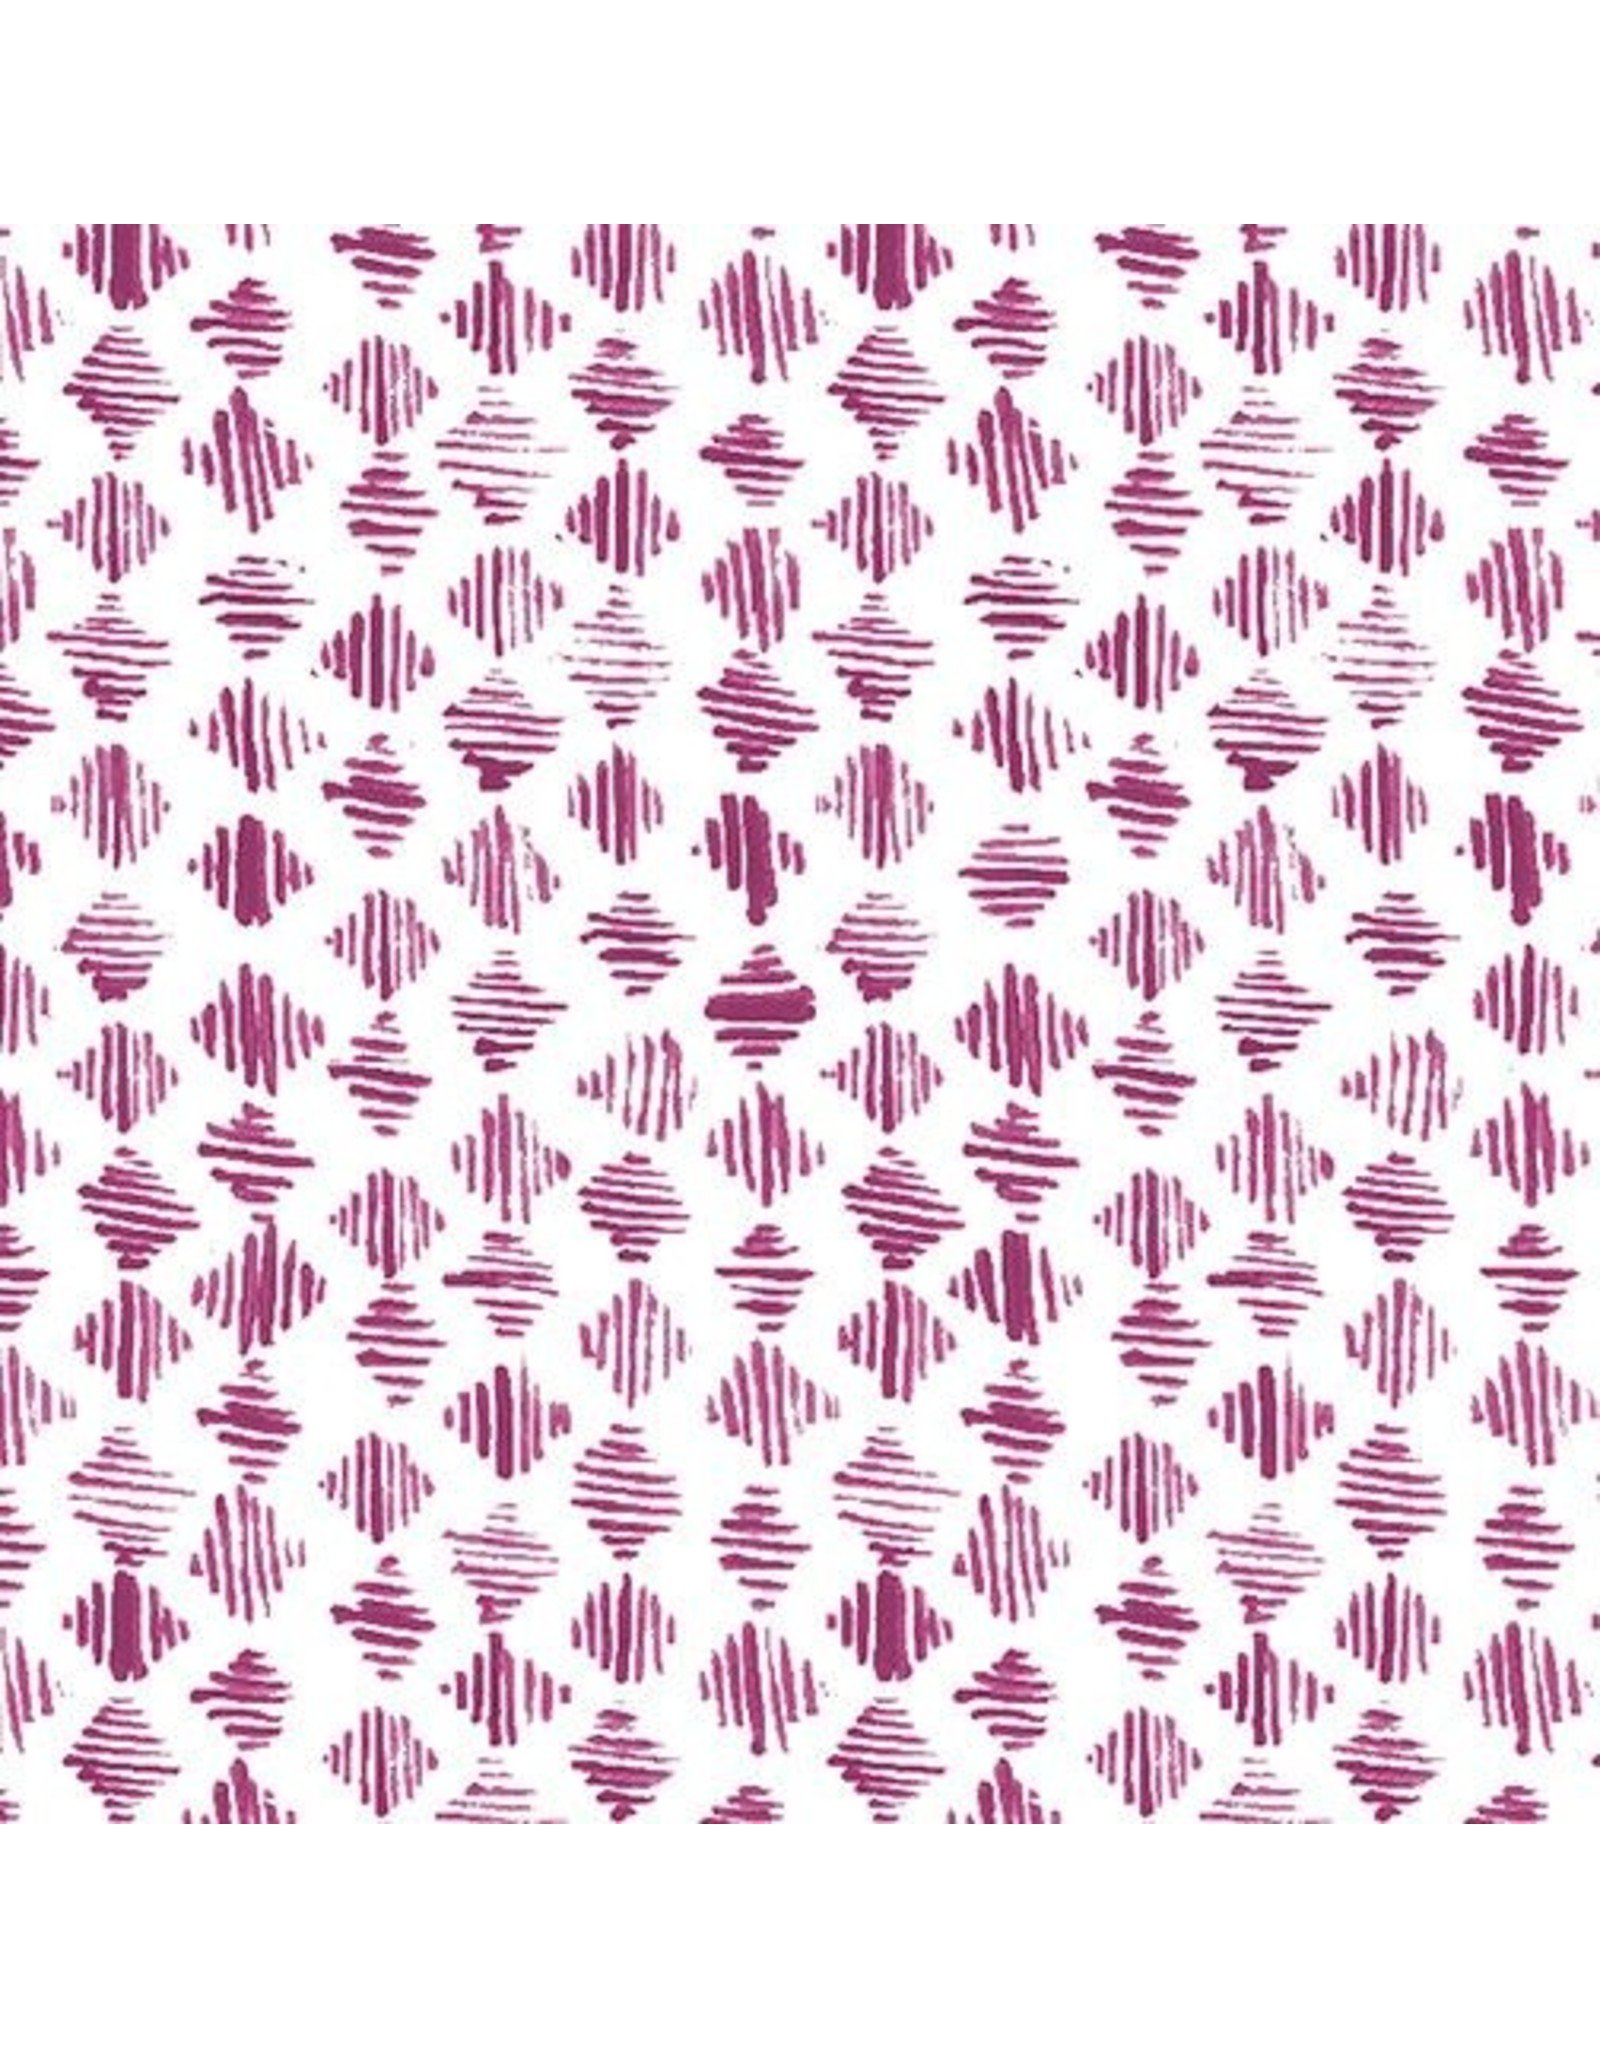 Contempo By Hand - Beads Dark Orchid coupon (± 54 x 110 cm)